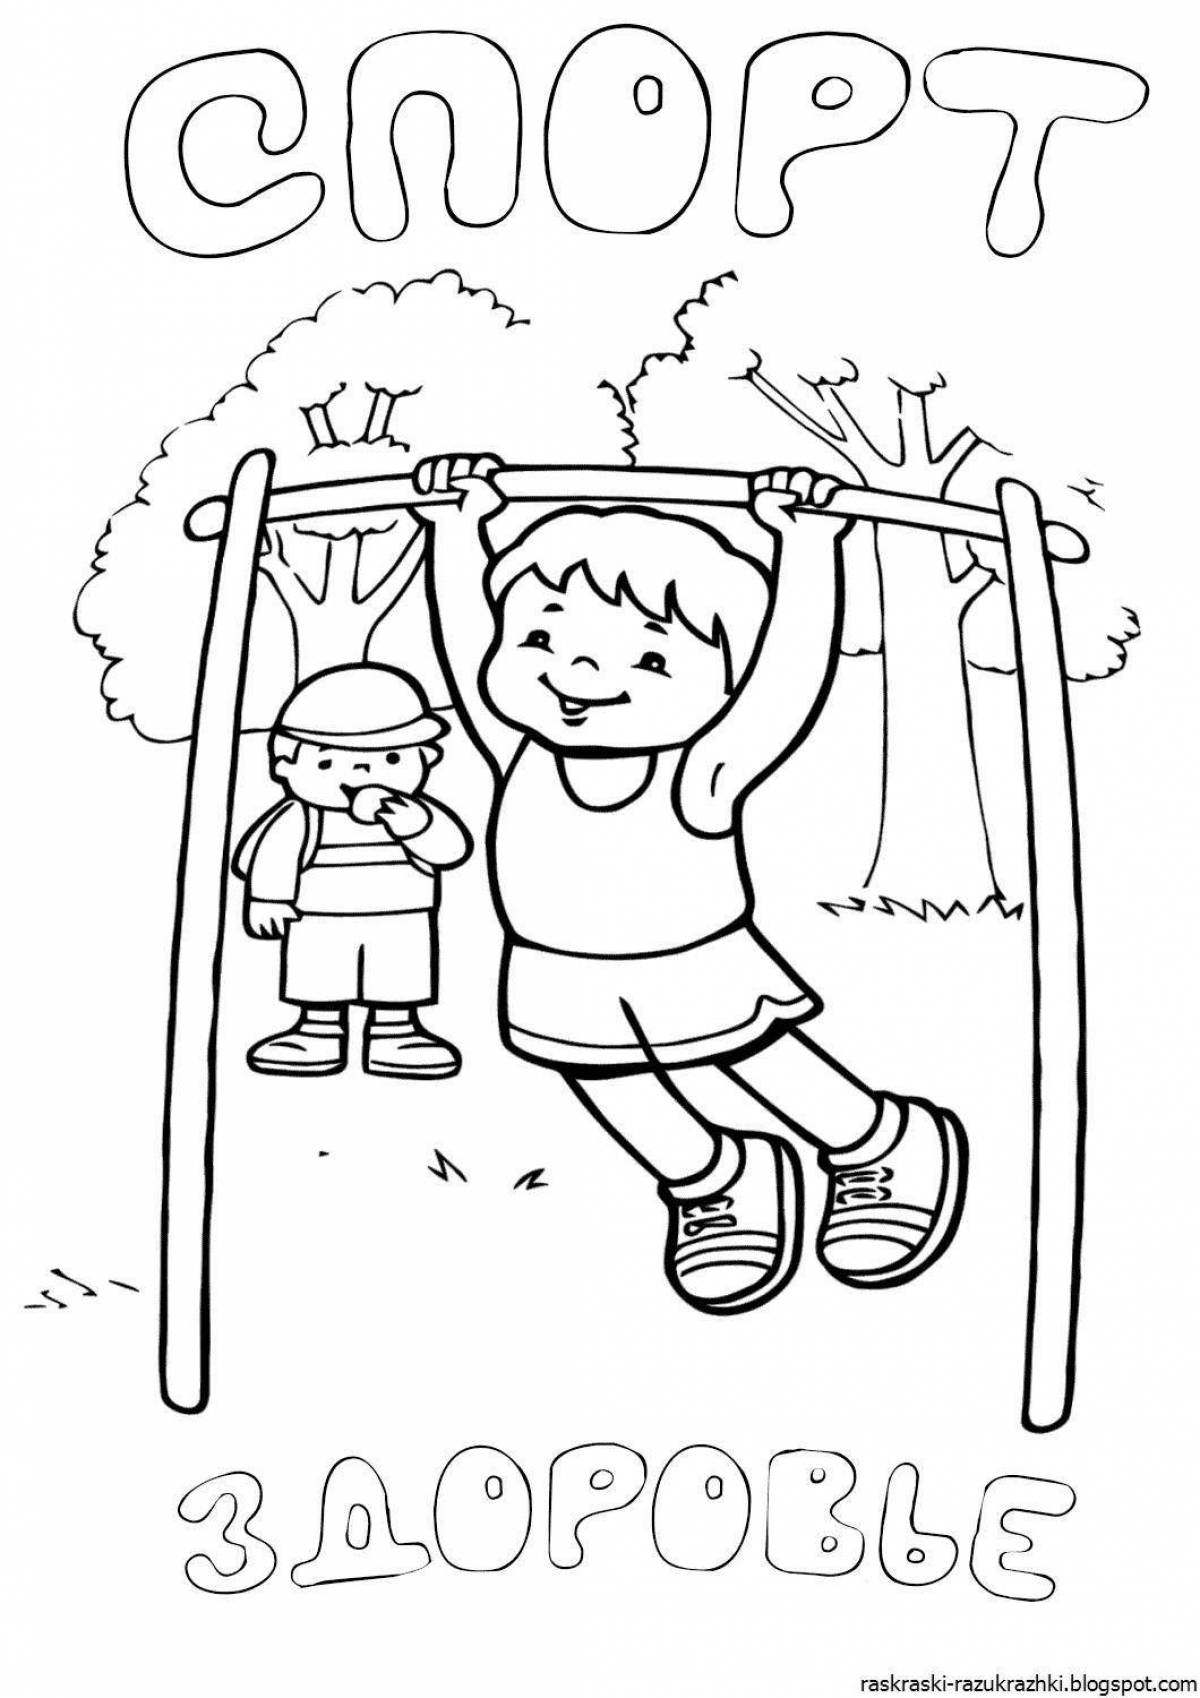 Attractive class 3 healthy lifestyle coloring page